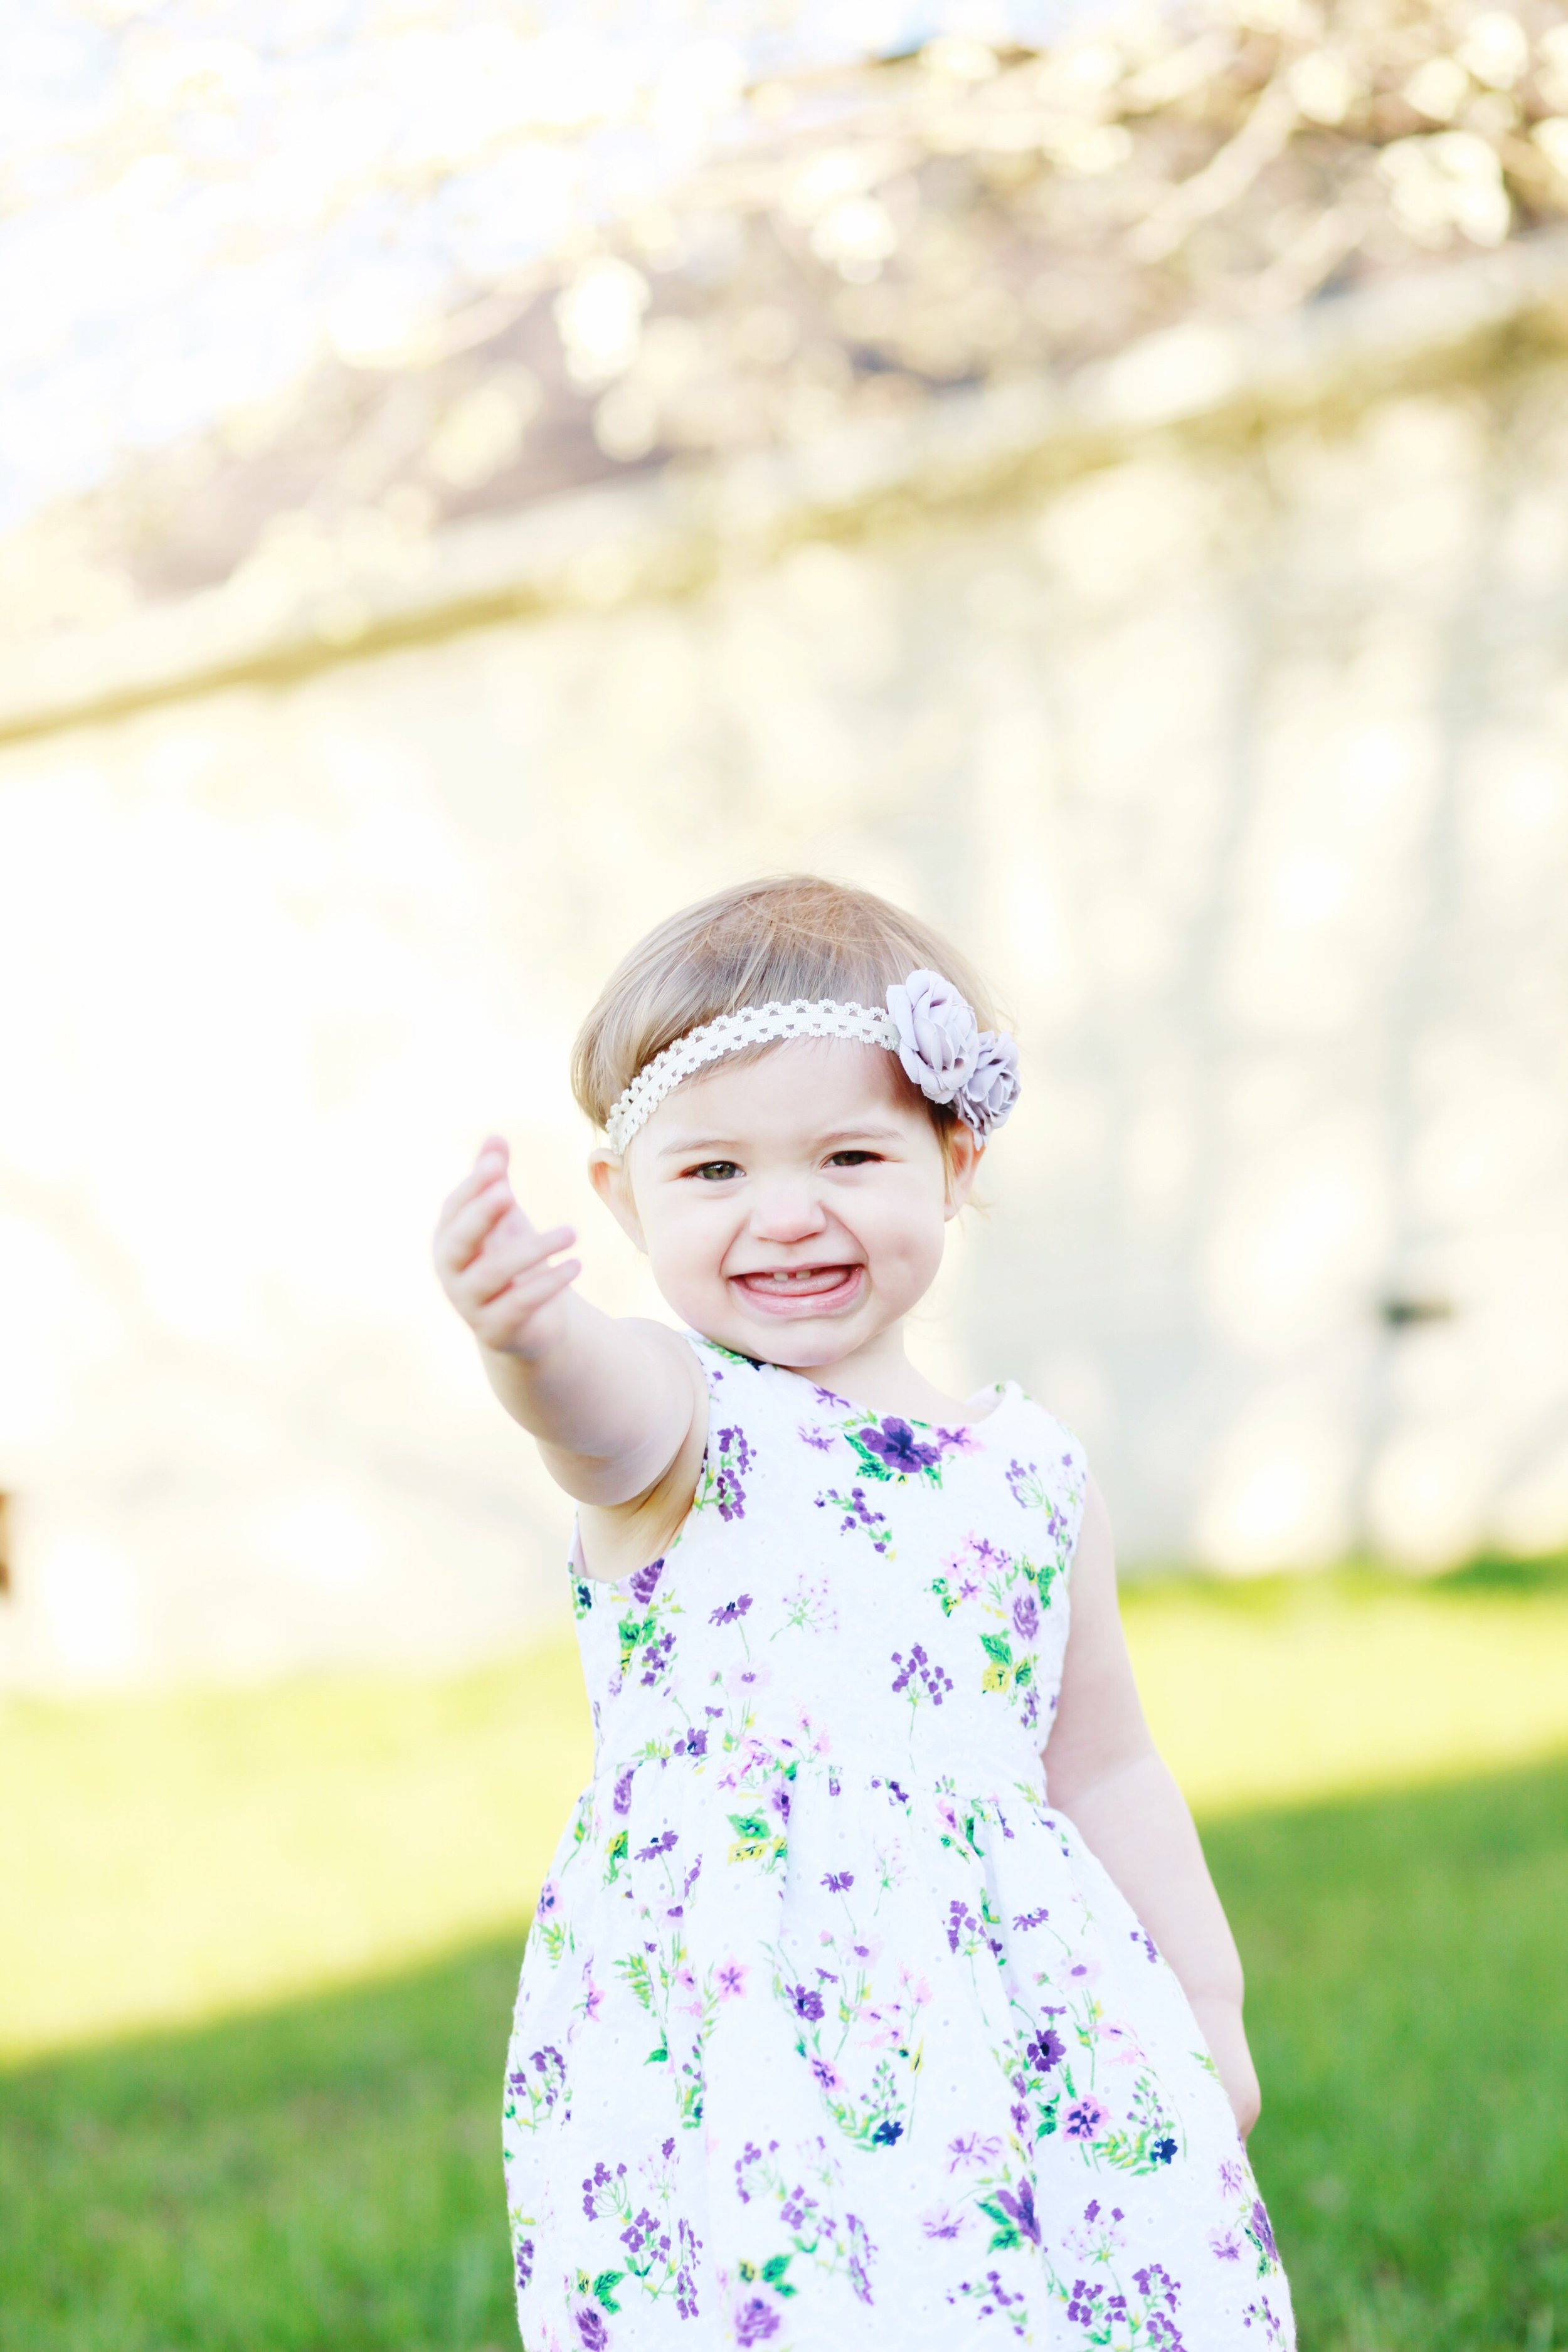 Iris 18 Months and How-To Capture Beautiful Easter Photos of Your Toddler